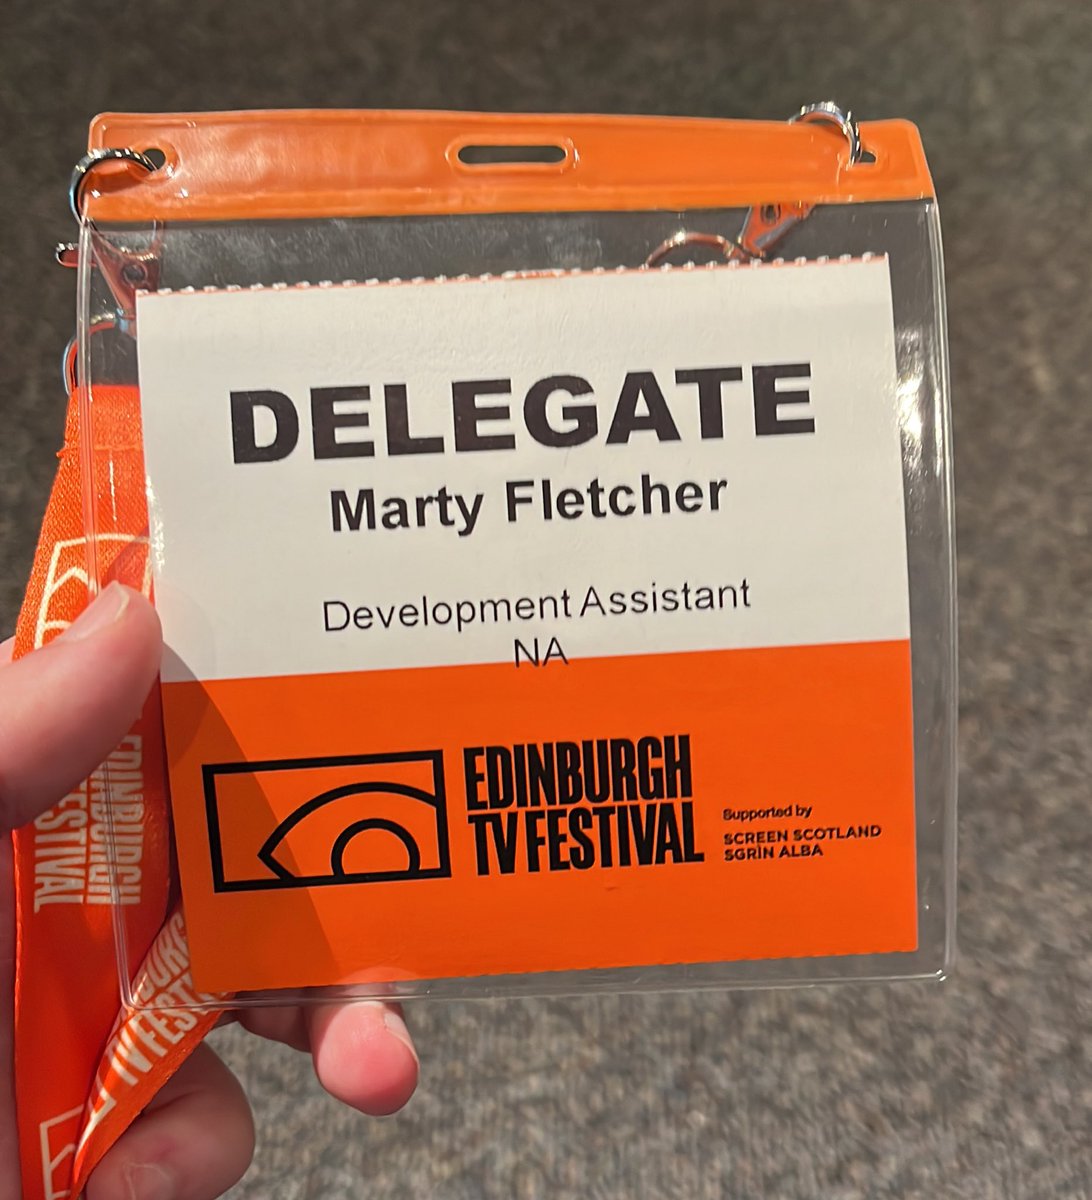 At my first in person @EdinburghTVFest after doing @TheNetwork_TV back in 2020! Such an interesting week and have chatted to so many tv people #edtvfest